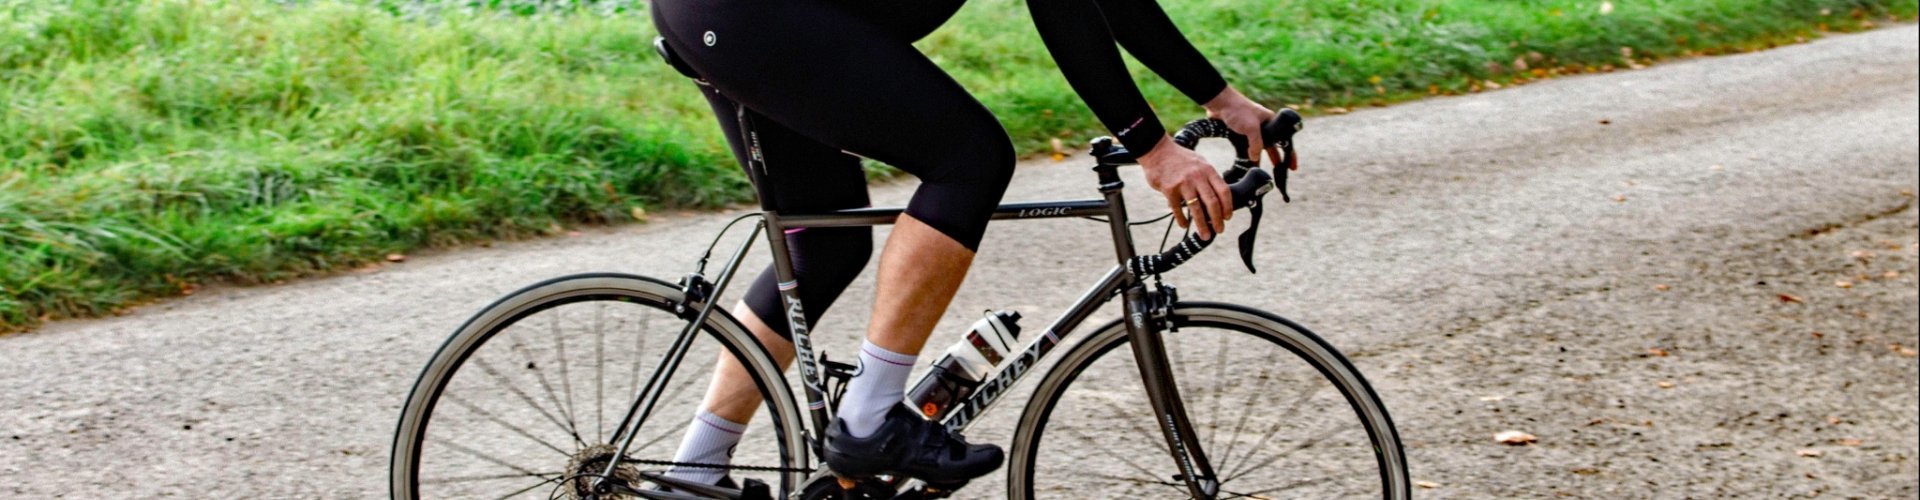 Bib shorts and knee warmers are a great combination for changing weather in spring and fall.